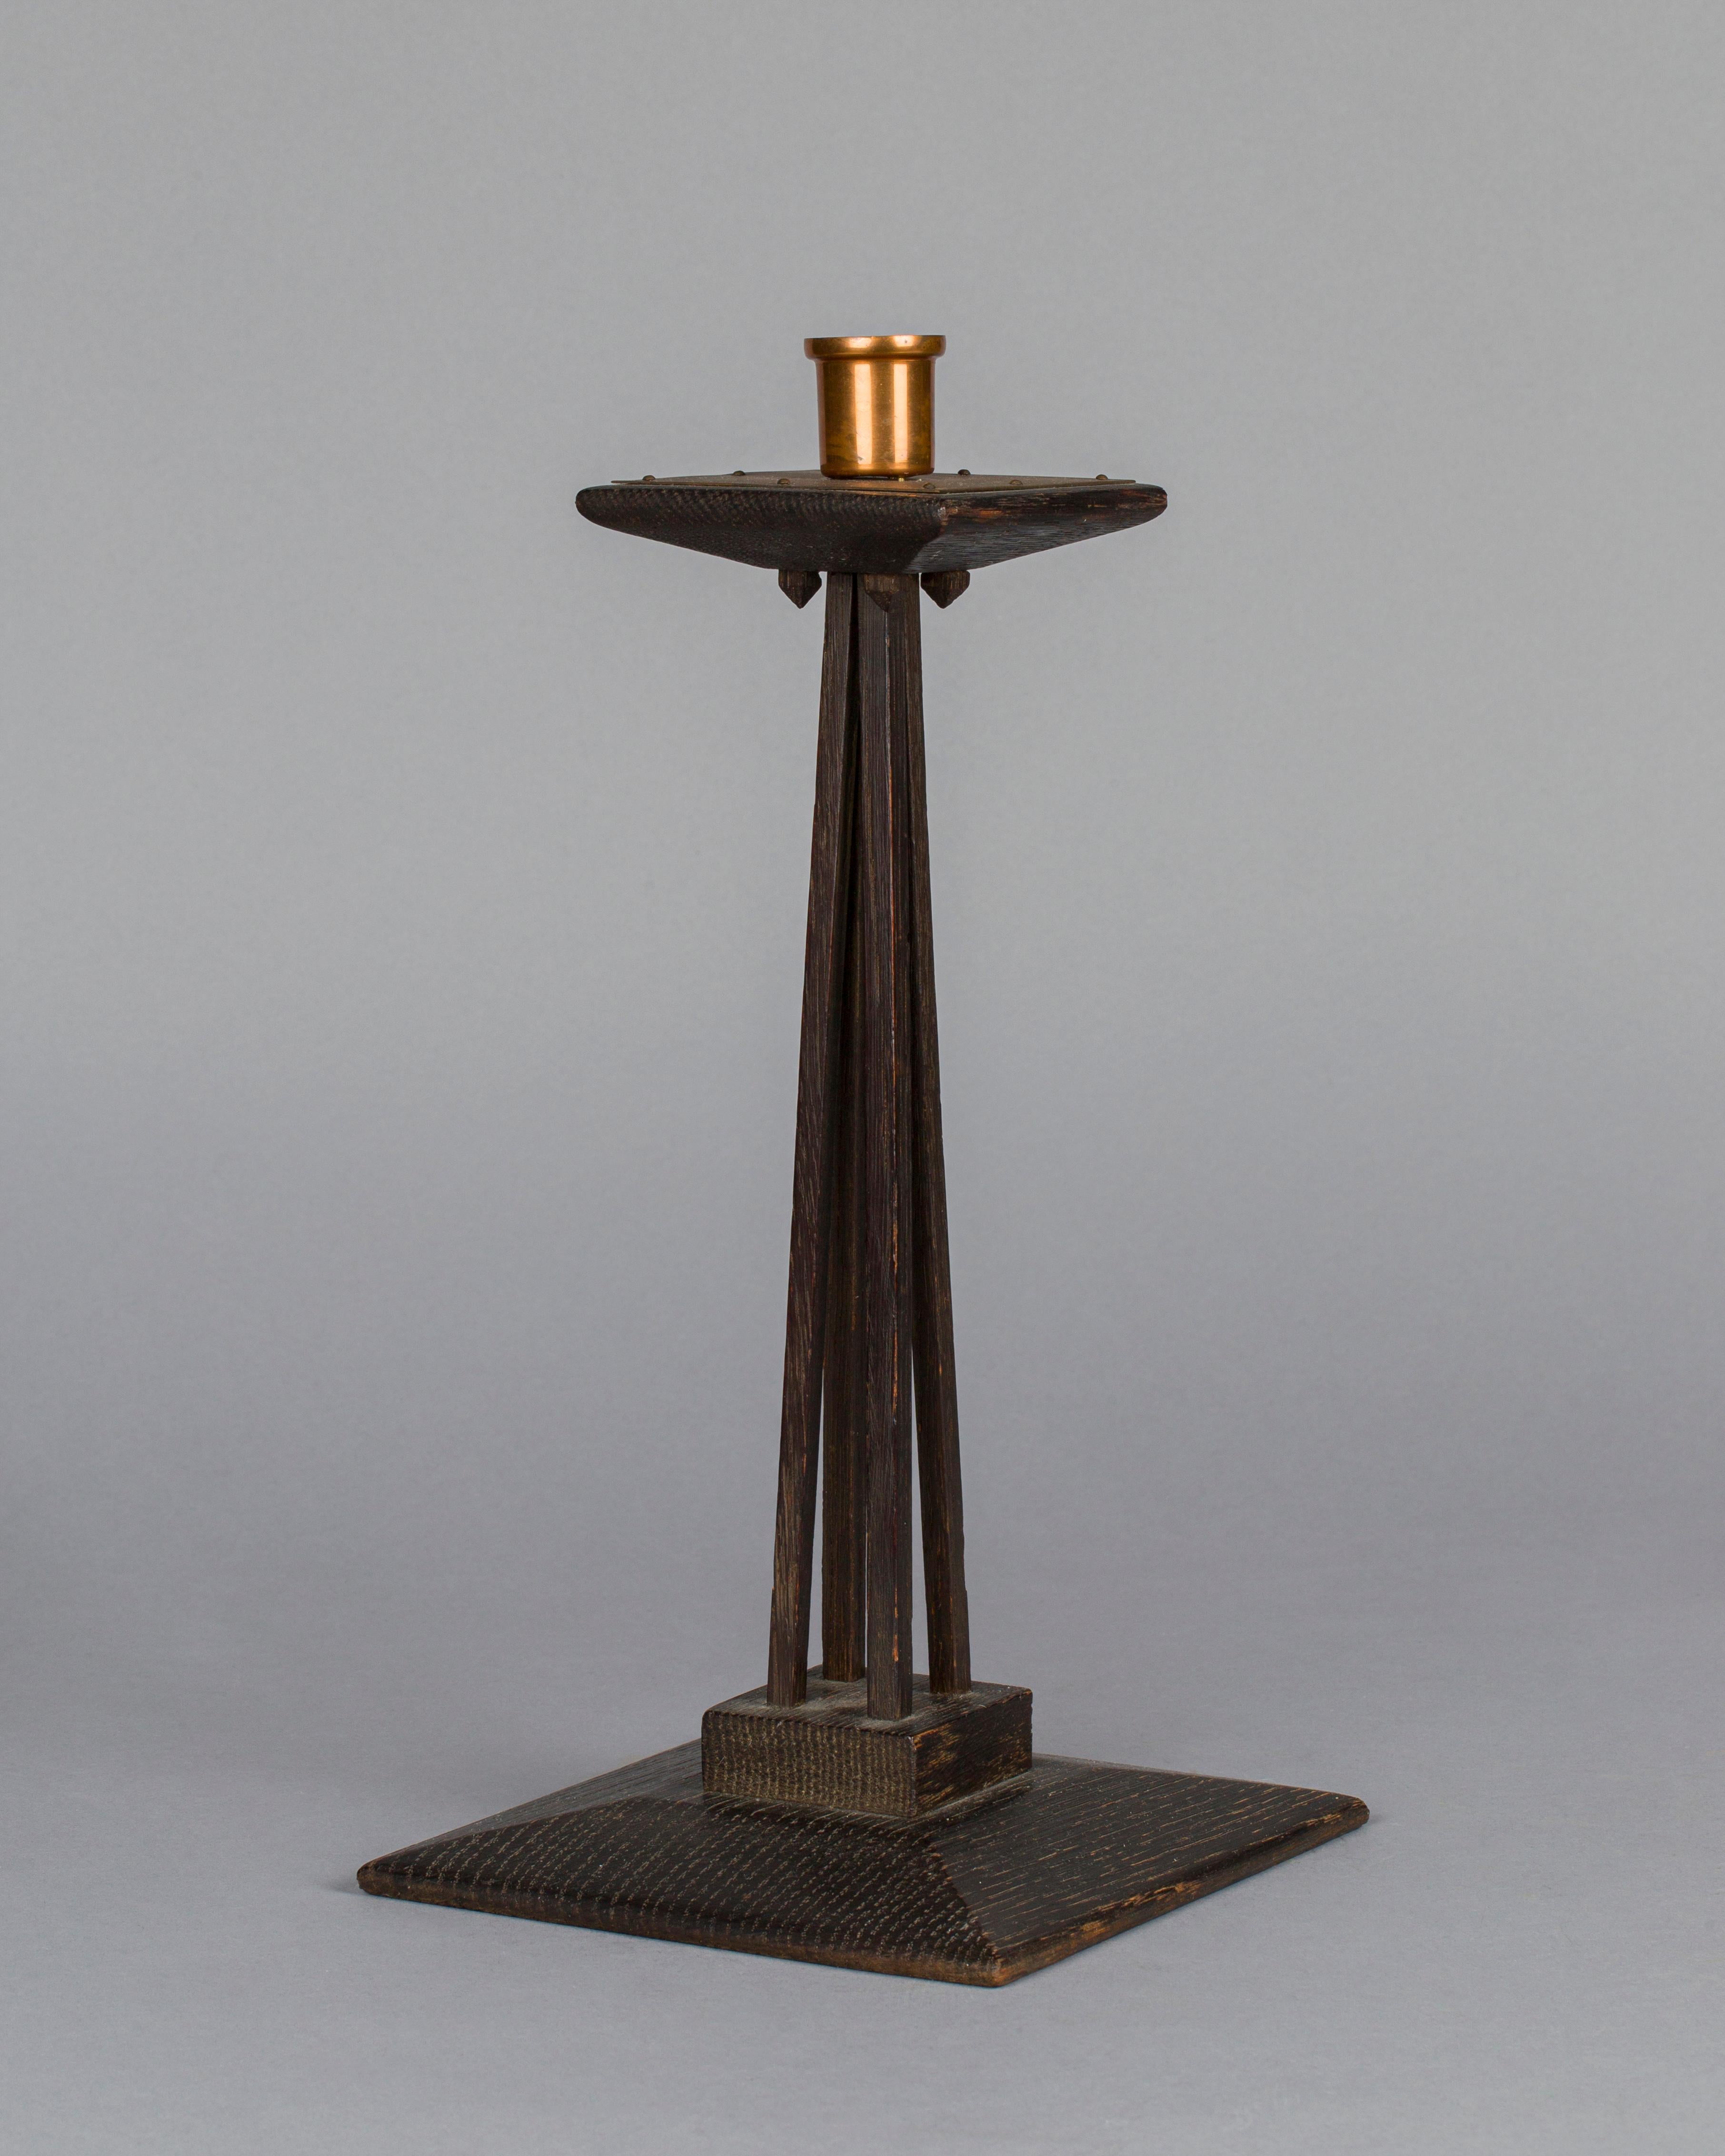 Charles Rohlfs, 1853-1936
Pair of Candlesticks, 1904
Oak wood and copper
Another set of these candlesticks are in the permanent collection and on view at the Metropolitan Museum of Art, New York.